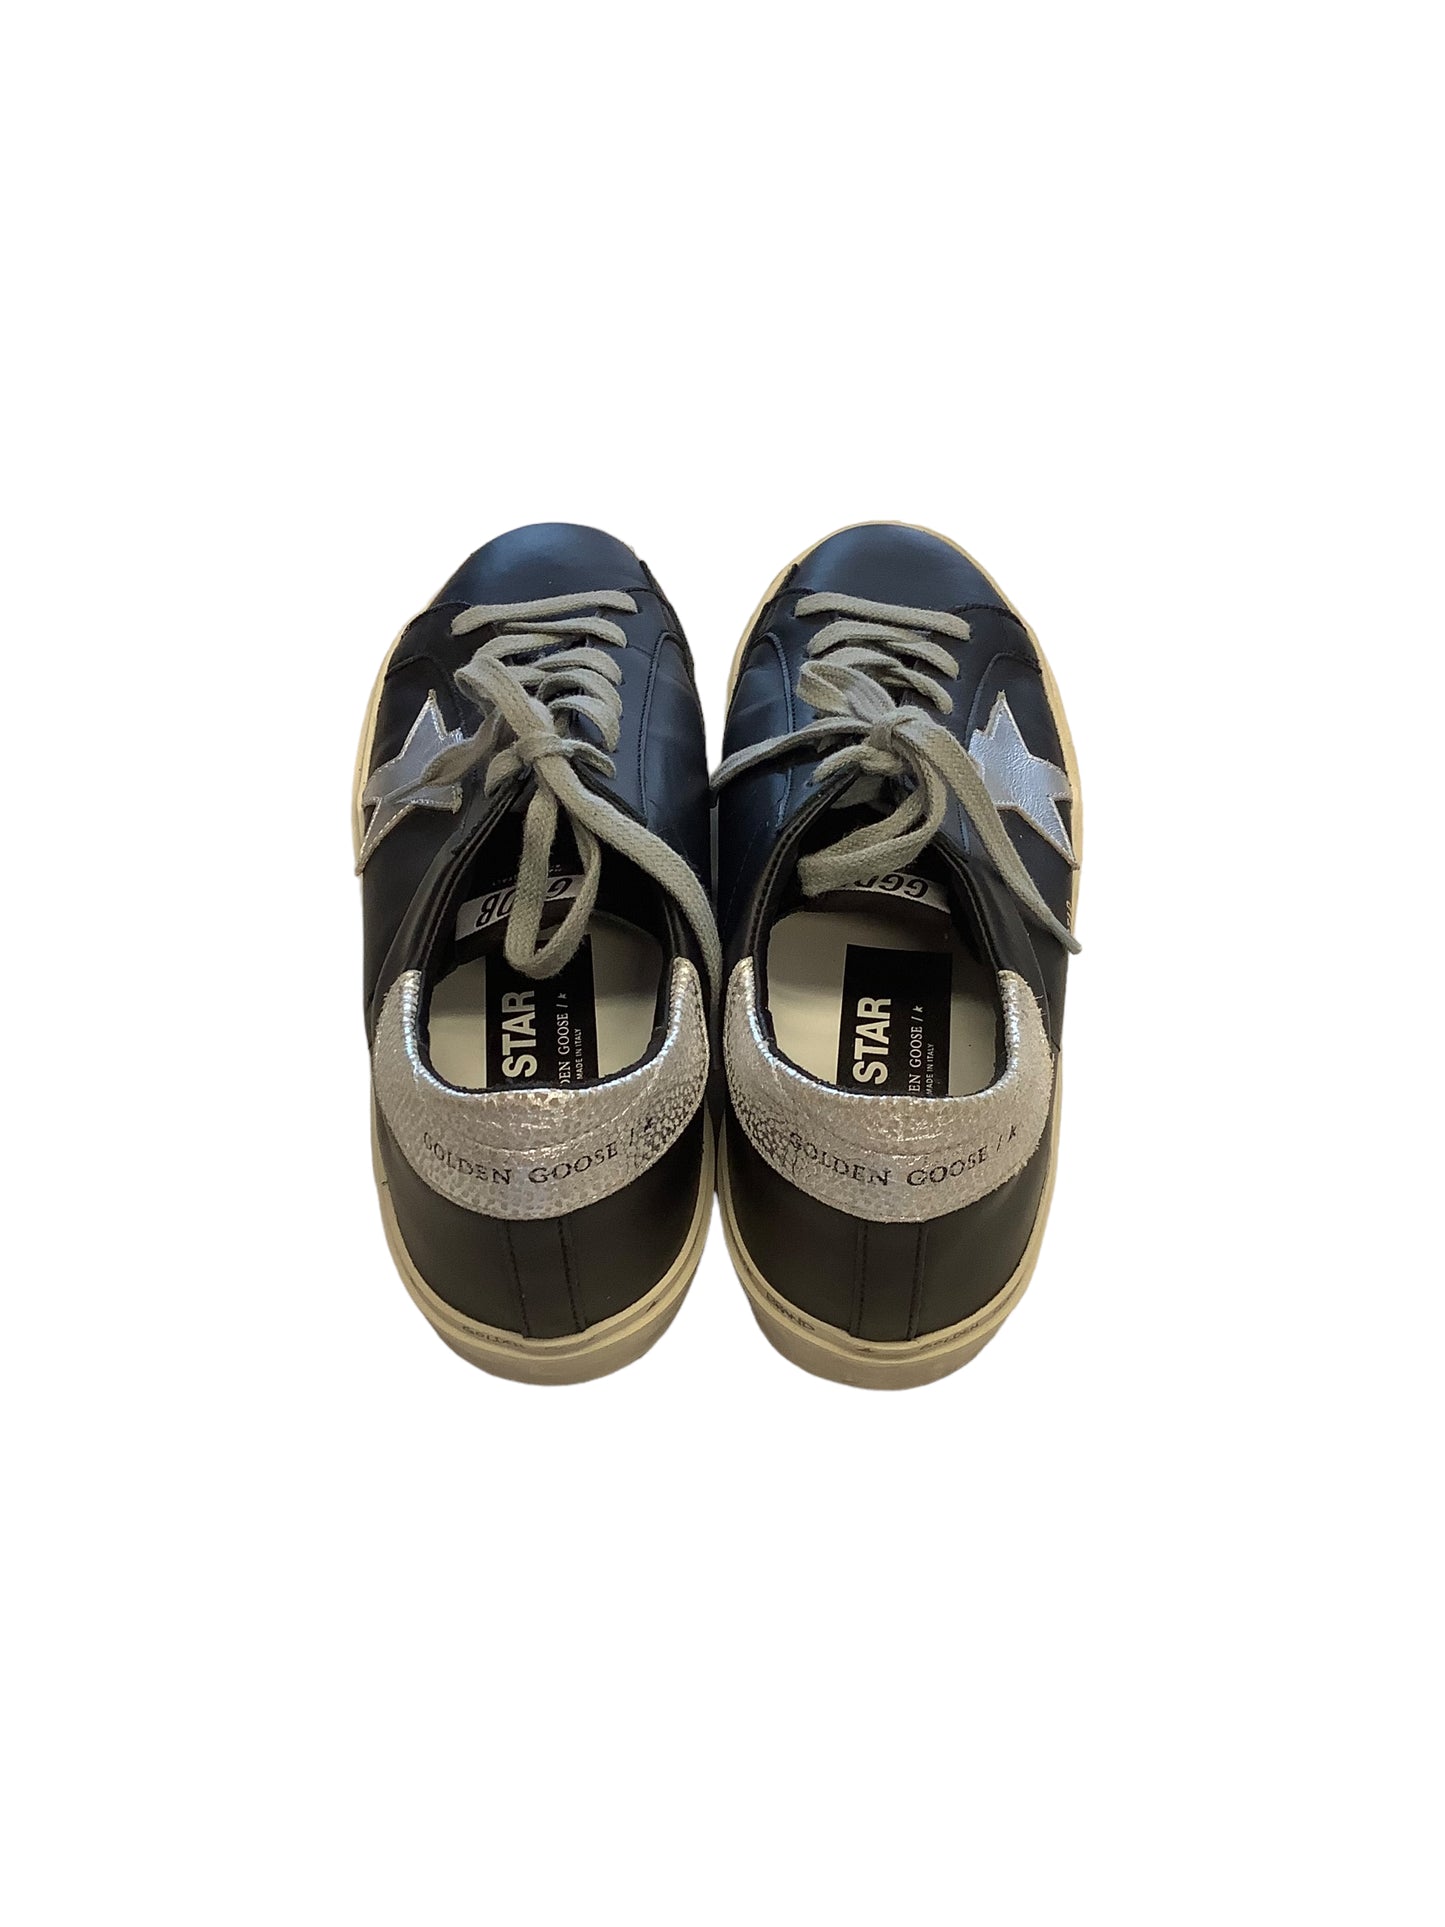 Shoes Sneakers By Golden Goose  Size: 9